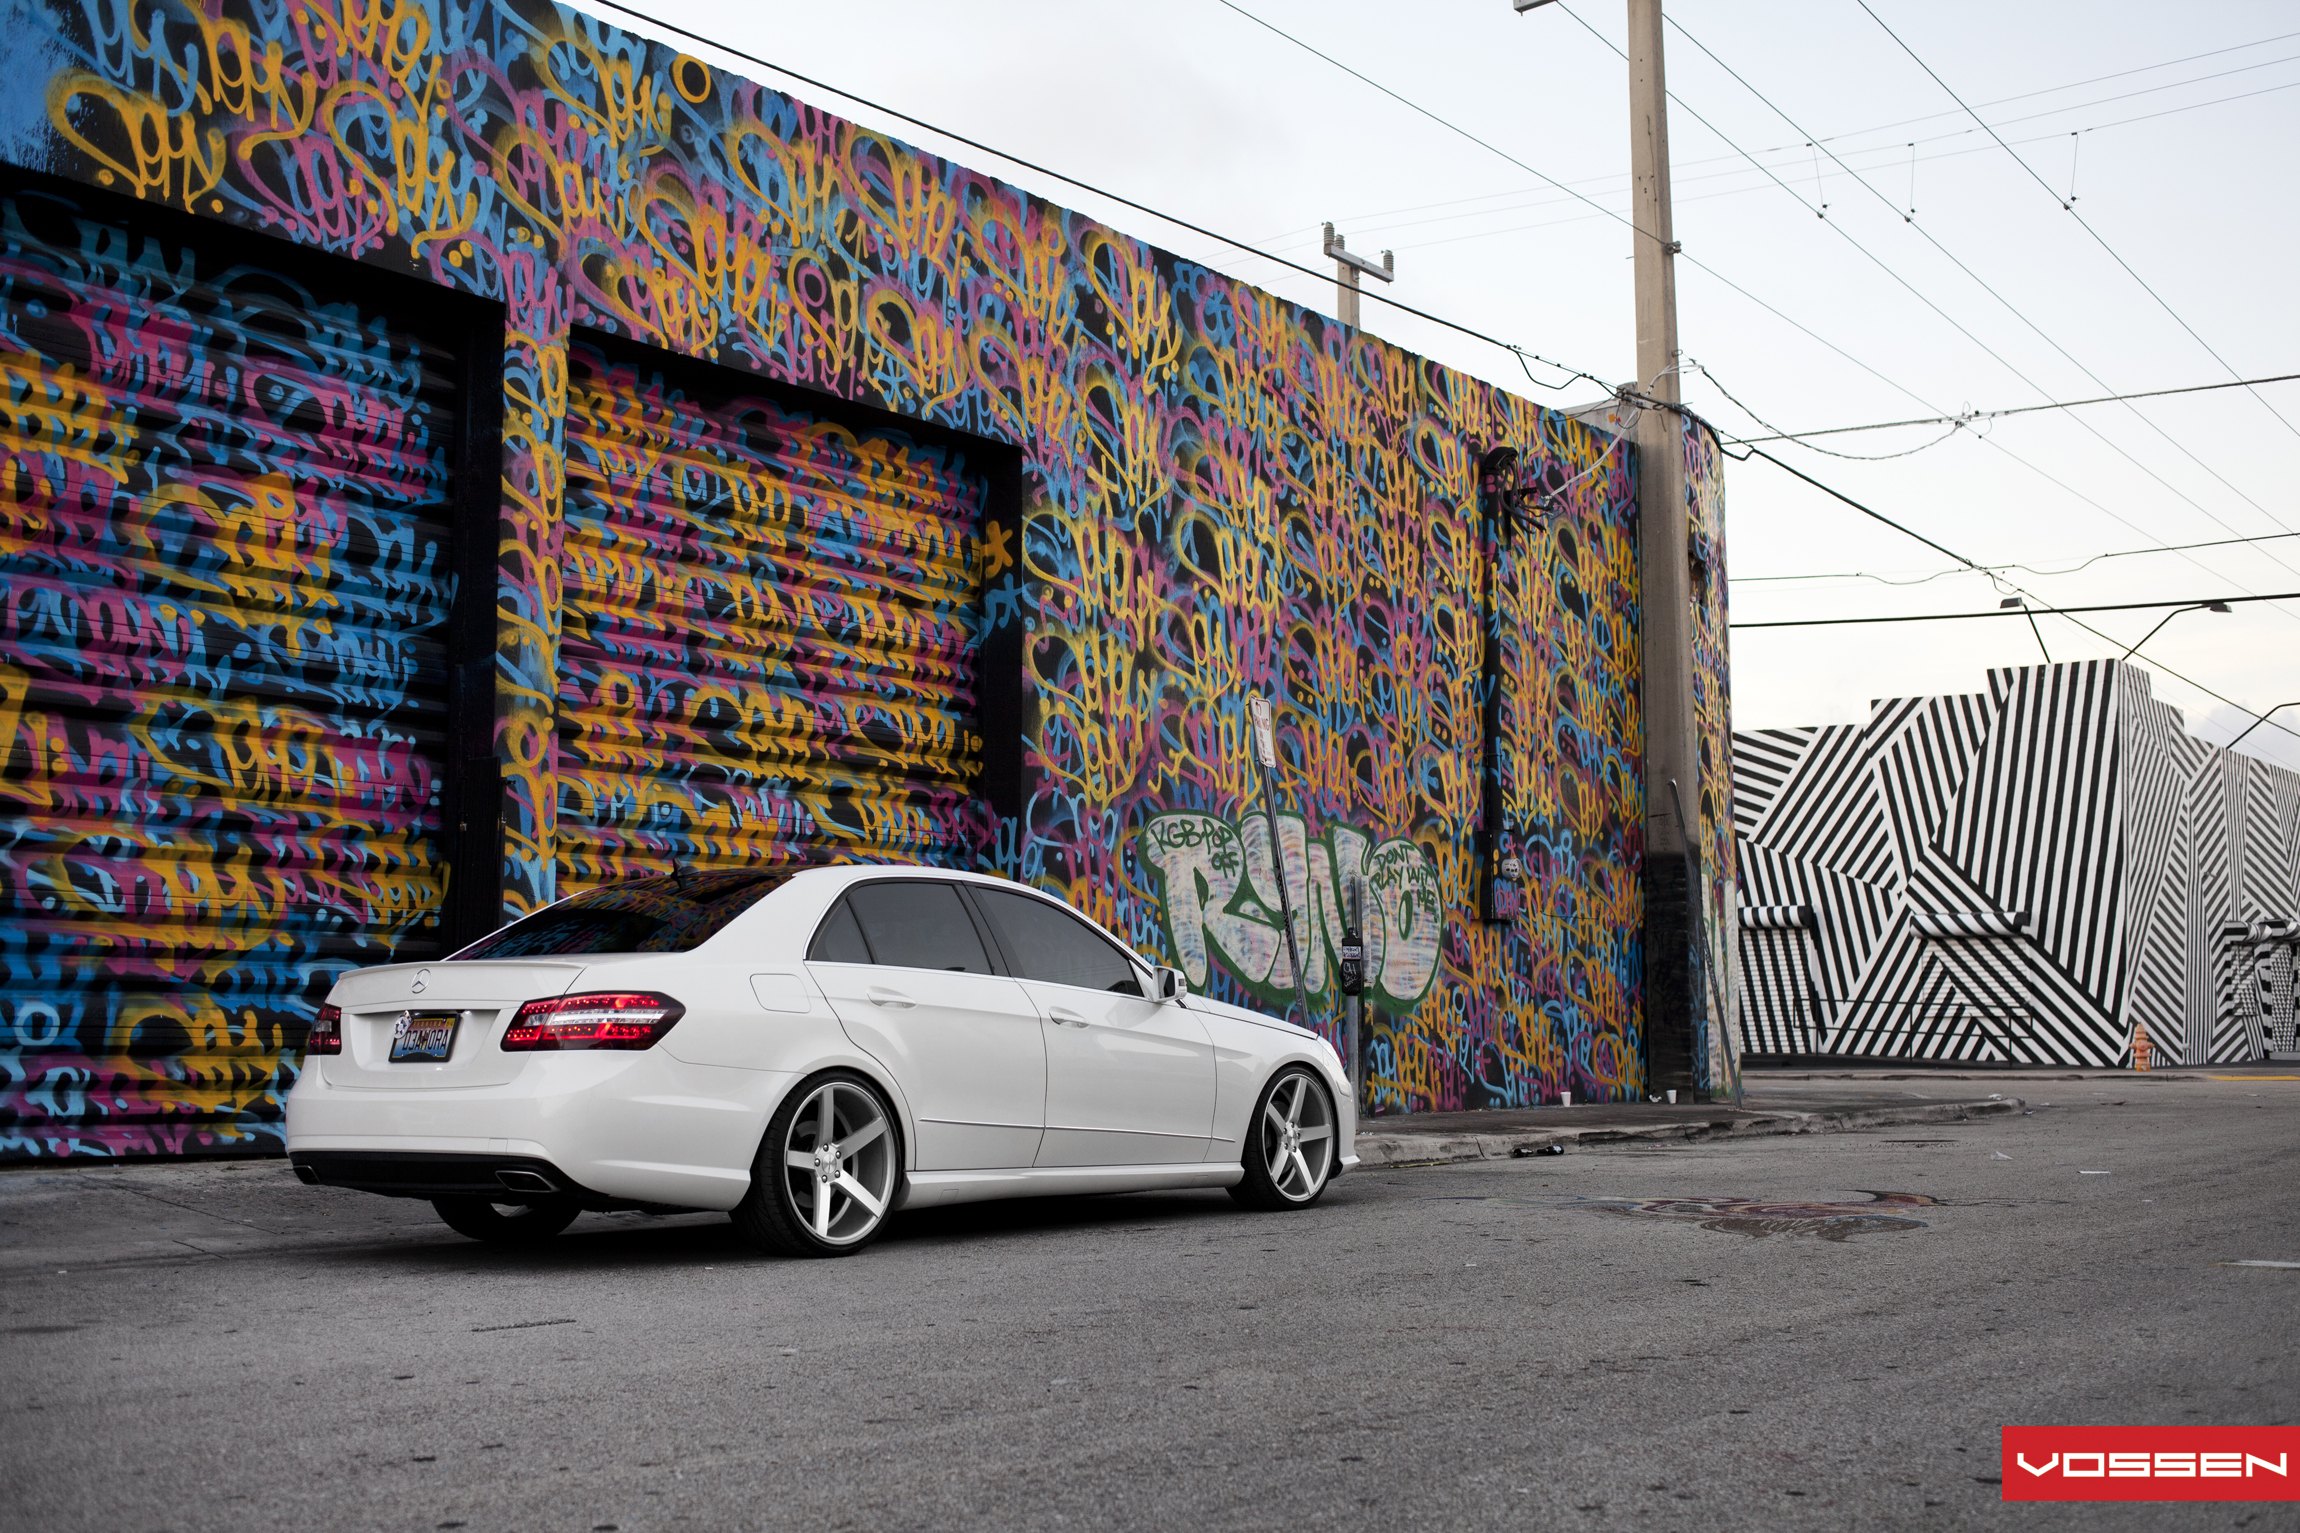 Aftermarket Rear Bumper Cover on White Mercedes E Class - Photo by Vossen